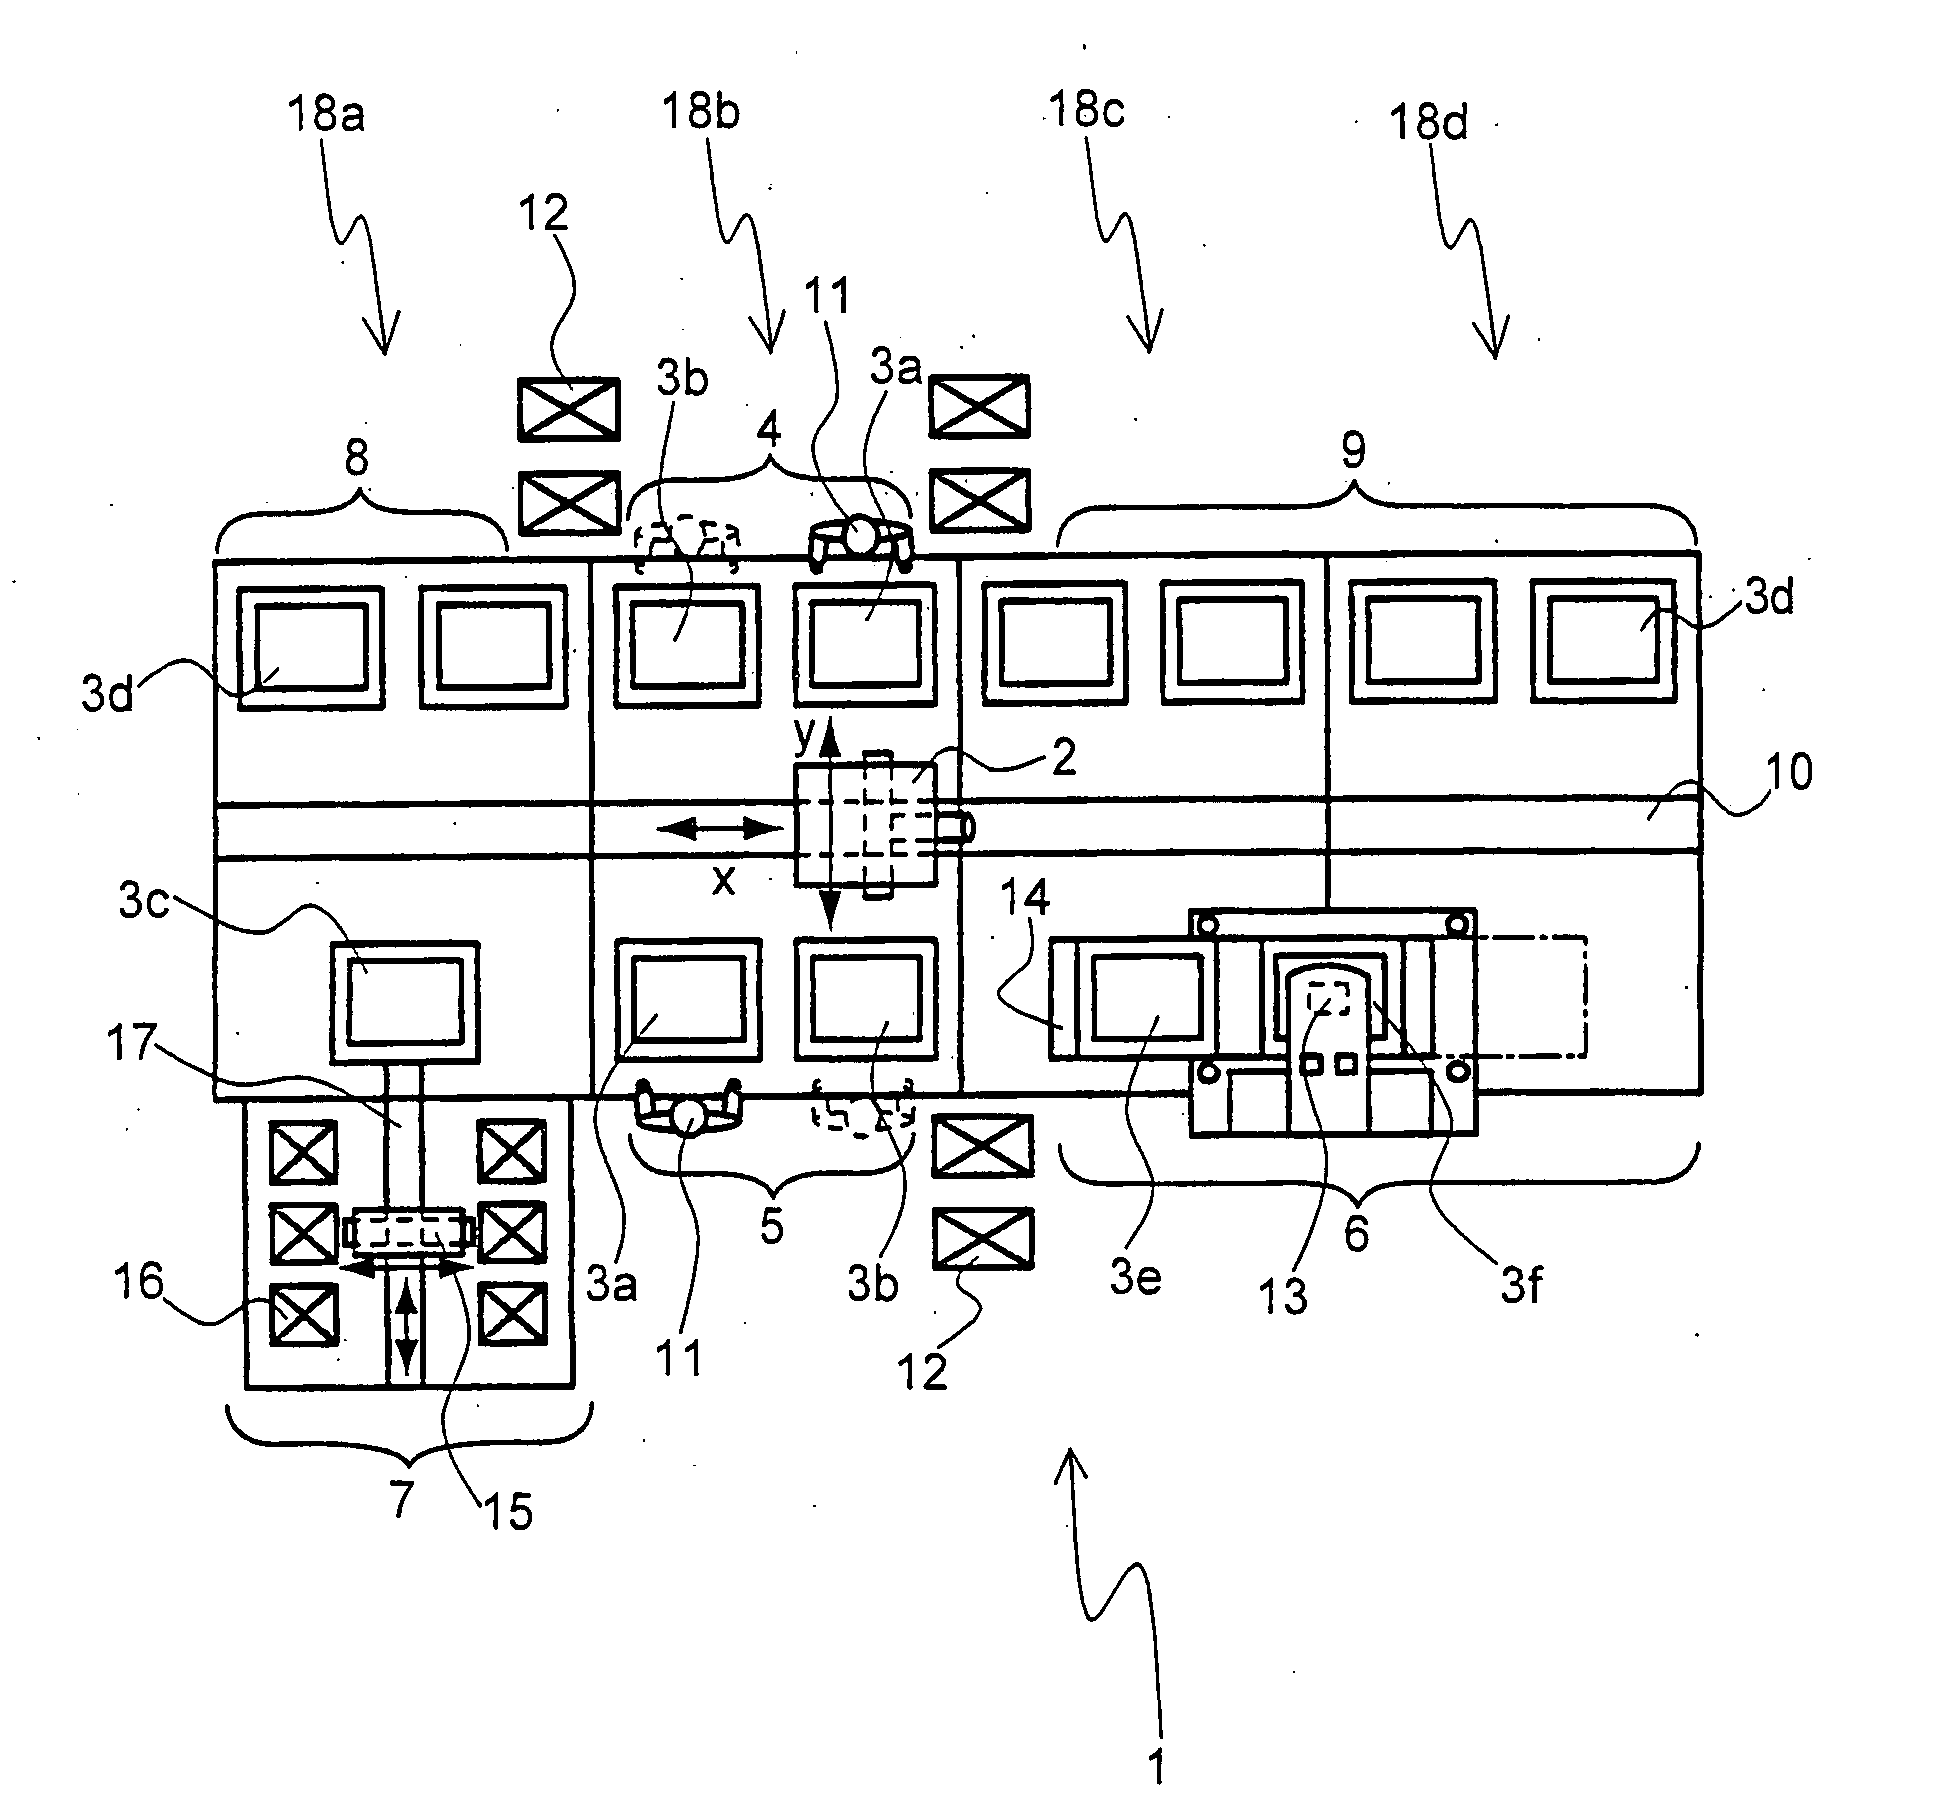 Assembly Cell For Assembling Modules From Work Pieces On Pallets, As Well As Method For Its Operation